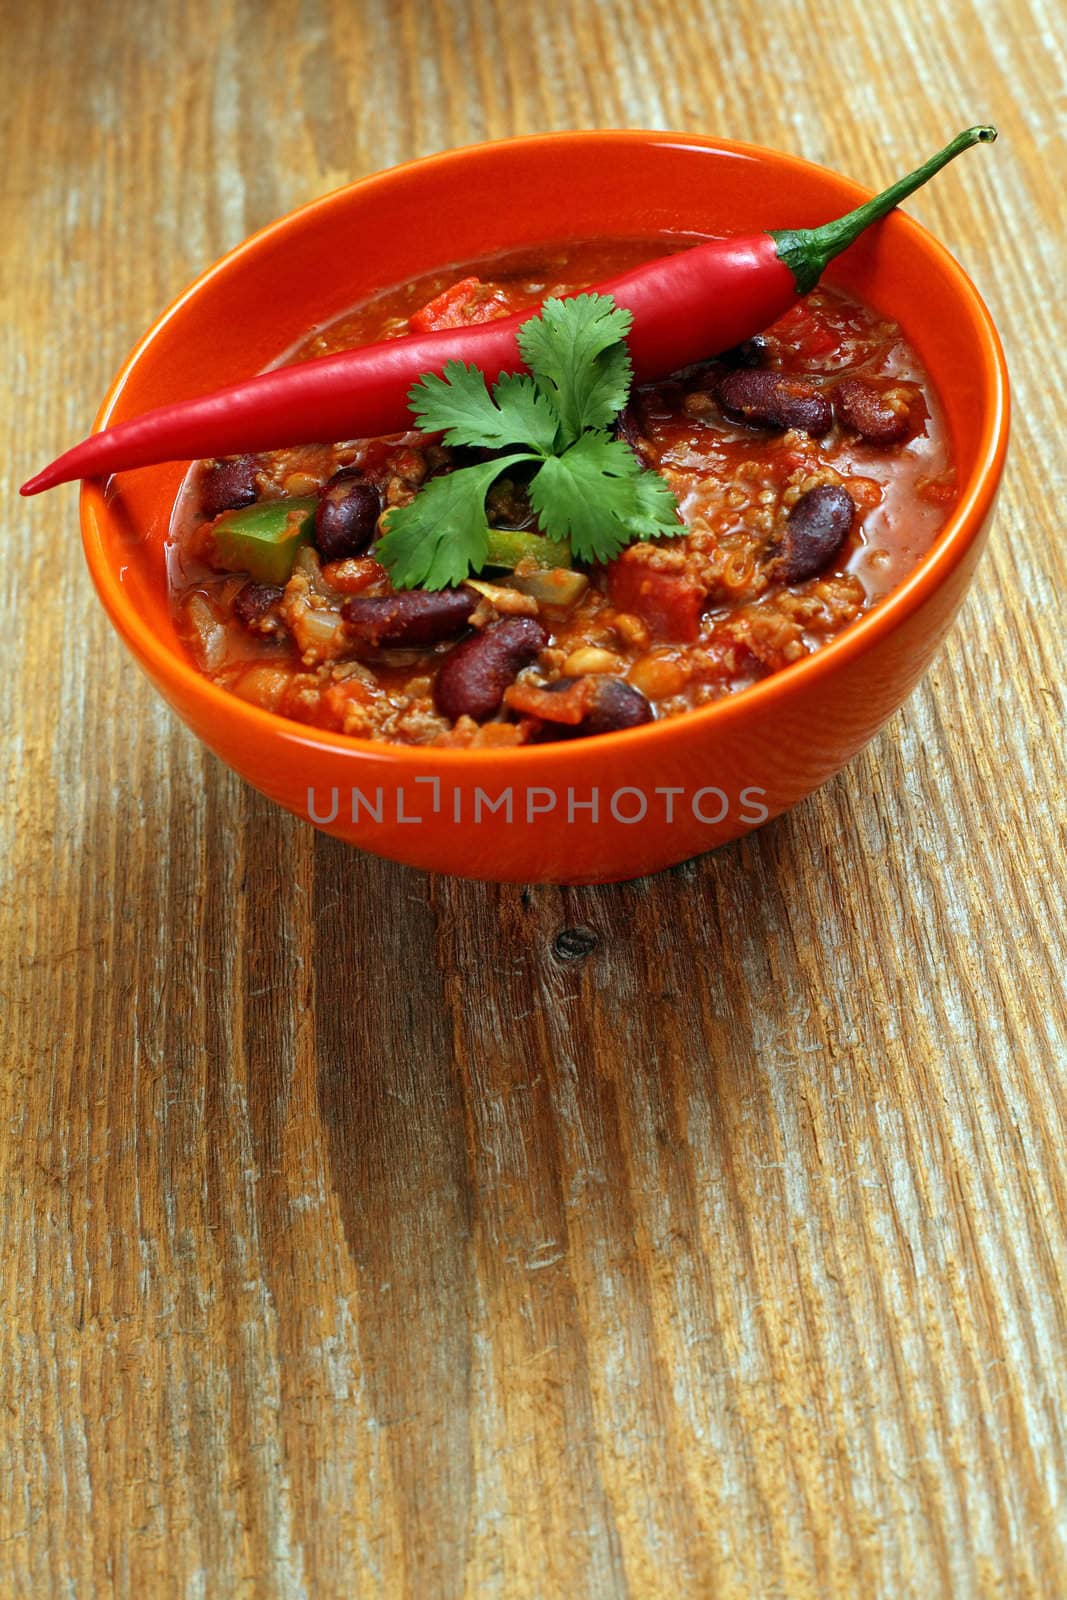 Chili with hot pepper by sumners